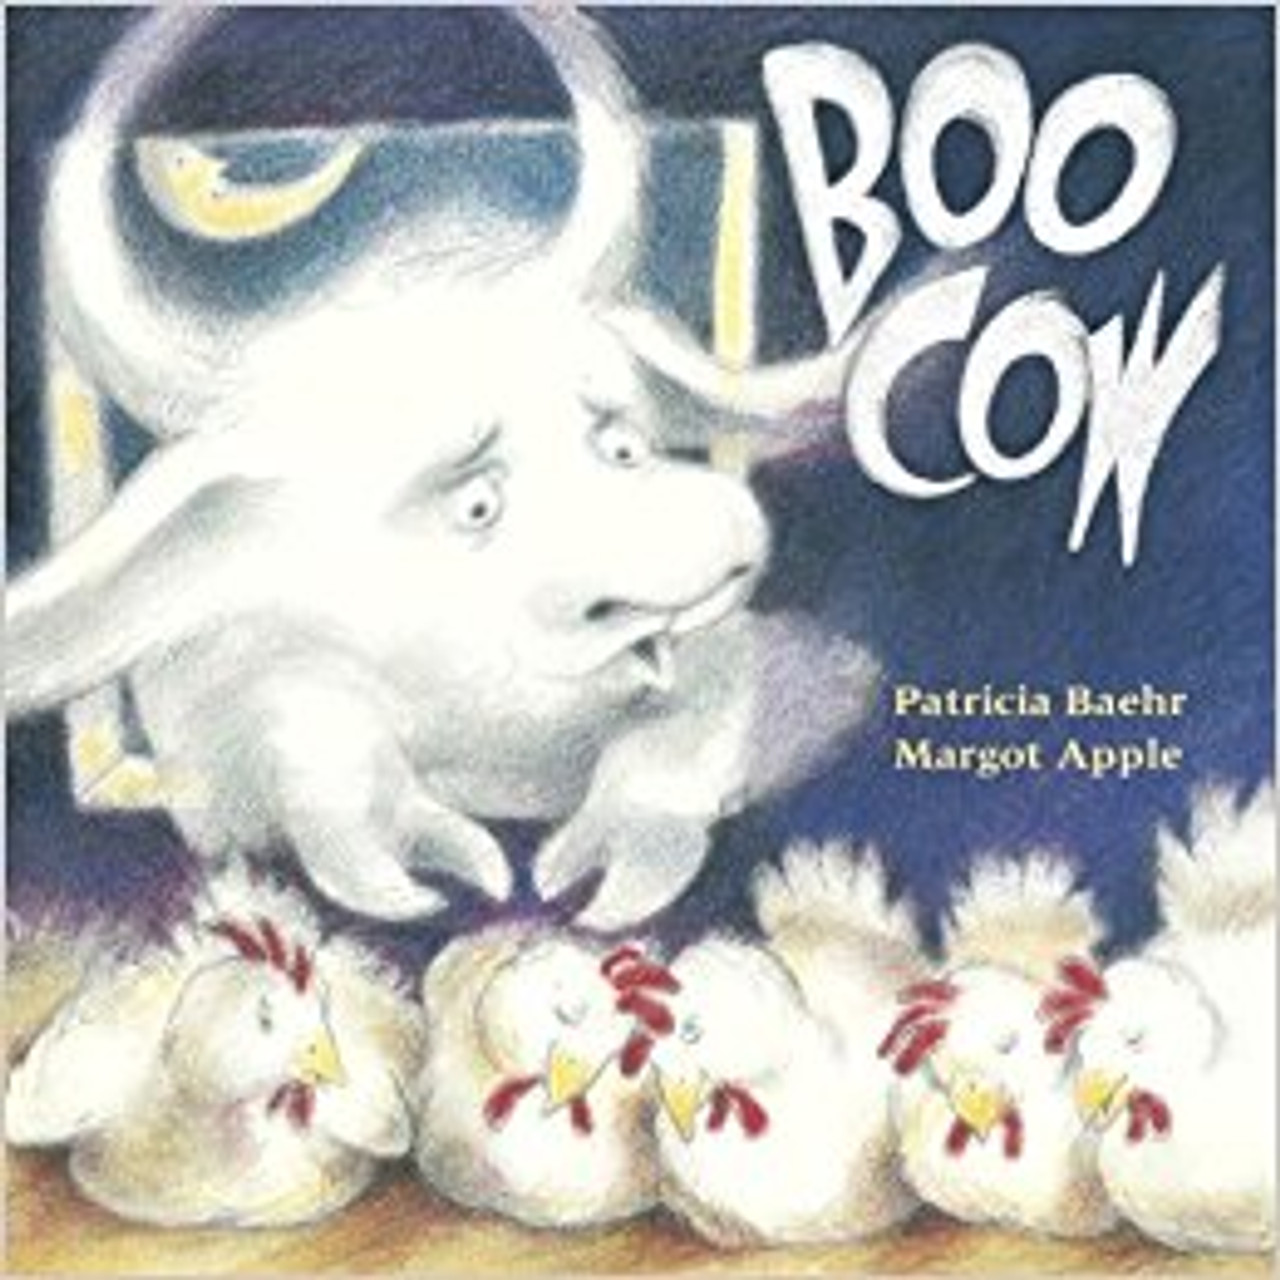 Every night at midnight the mysterious Boo Cow visits Mr. and Mrs. Noodlemans farm. Her eerie Moooooooos echo through the chicken coop, and the hens lay no eggs. The new farmers are at a loss; how can they drive out a ghostly bovine visitorand should they?